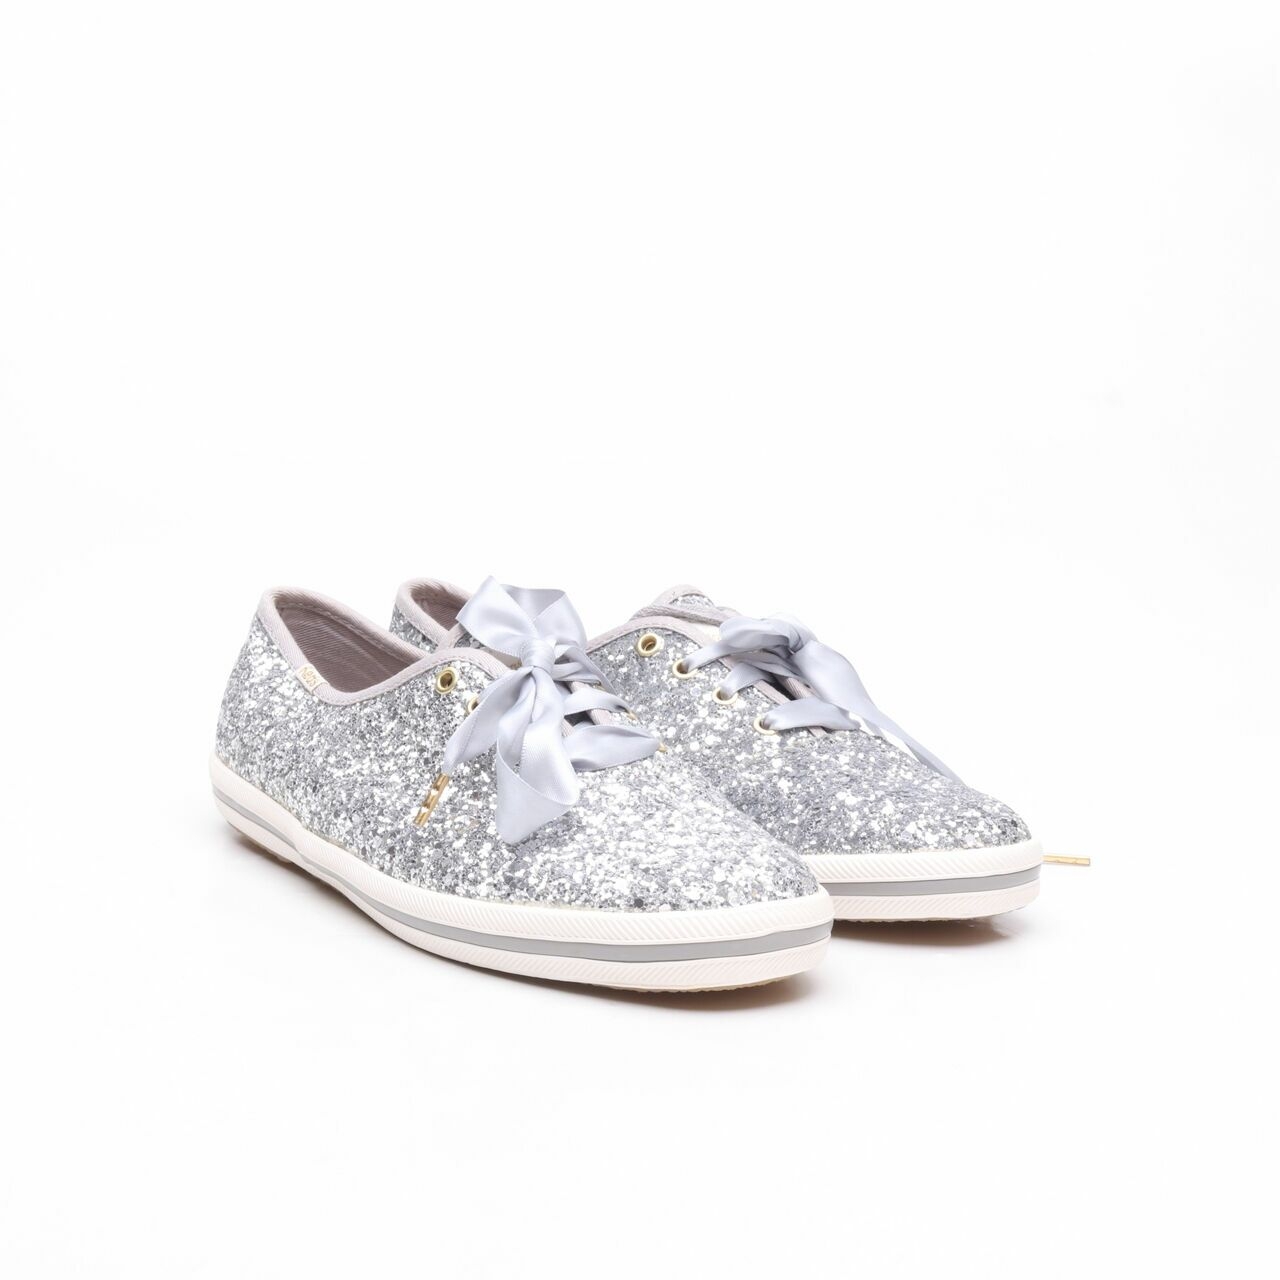 Keds For Kate Spade Champion Silver Glitter Sneakers